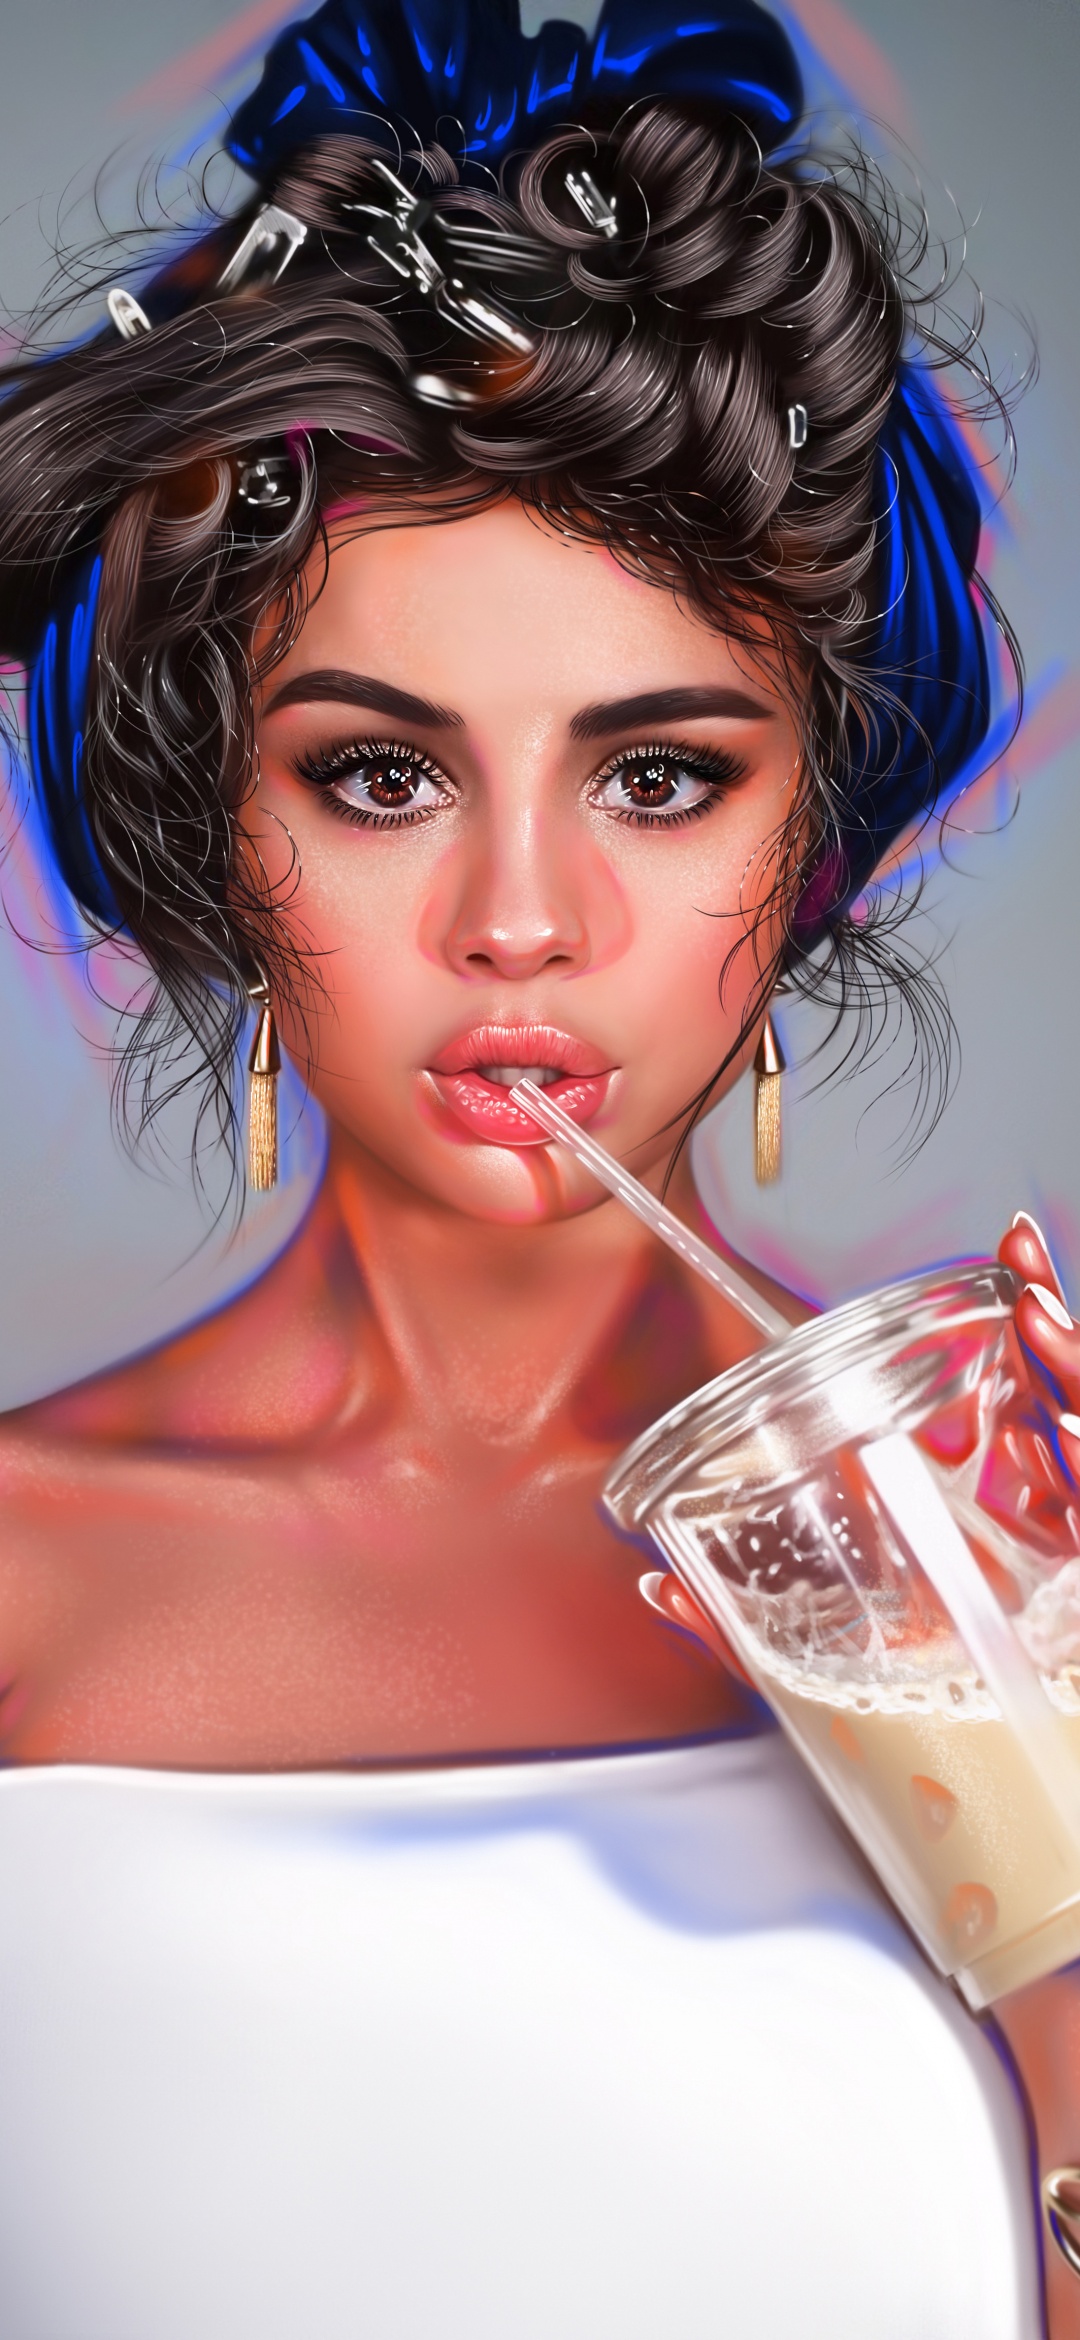 Selena - Gomez - Transparent - Png - Selena Gomez Hd Wallpaper For Iphone 6  Transparent PNG - 400x400 - Free Download on NicePNG